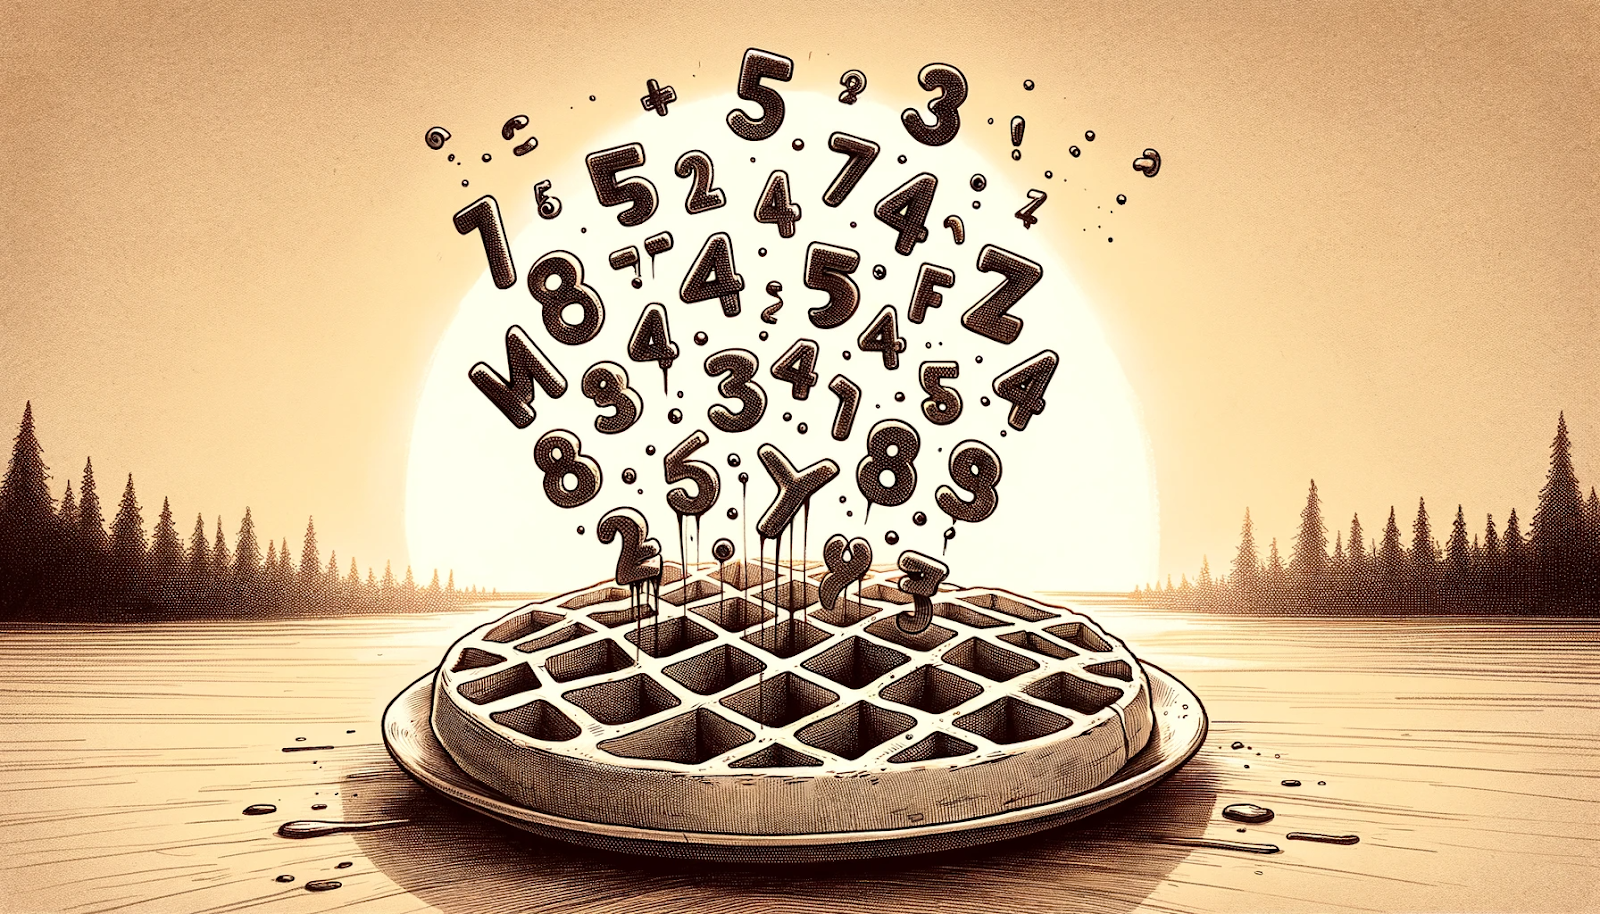 A sepia-toned cartoon sketch depicting a waffle with each of its square holes filled with numbers and letter symbols rising in front of a sunrise scene